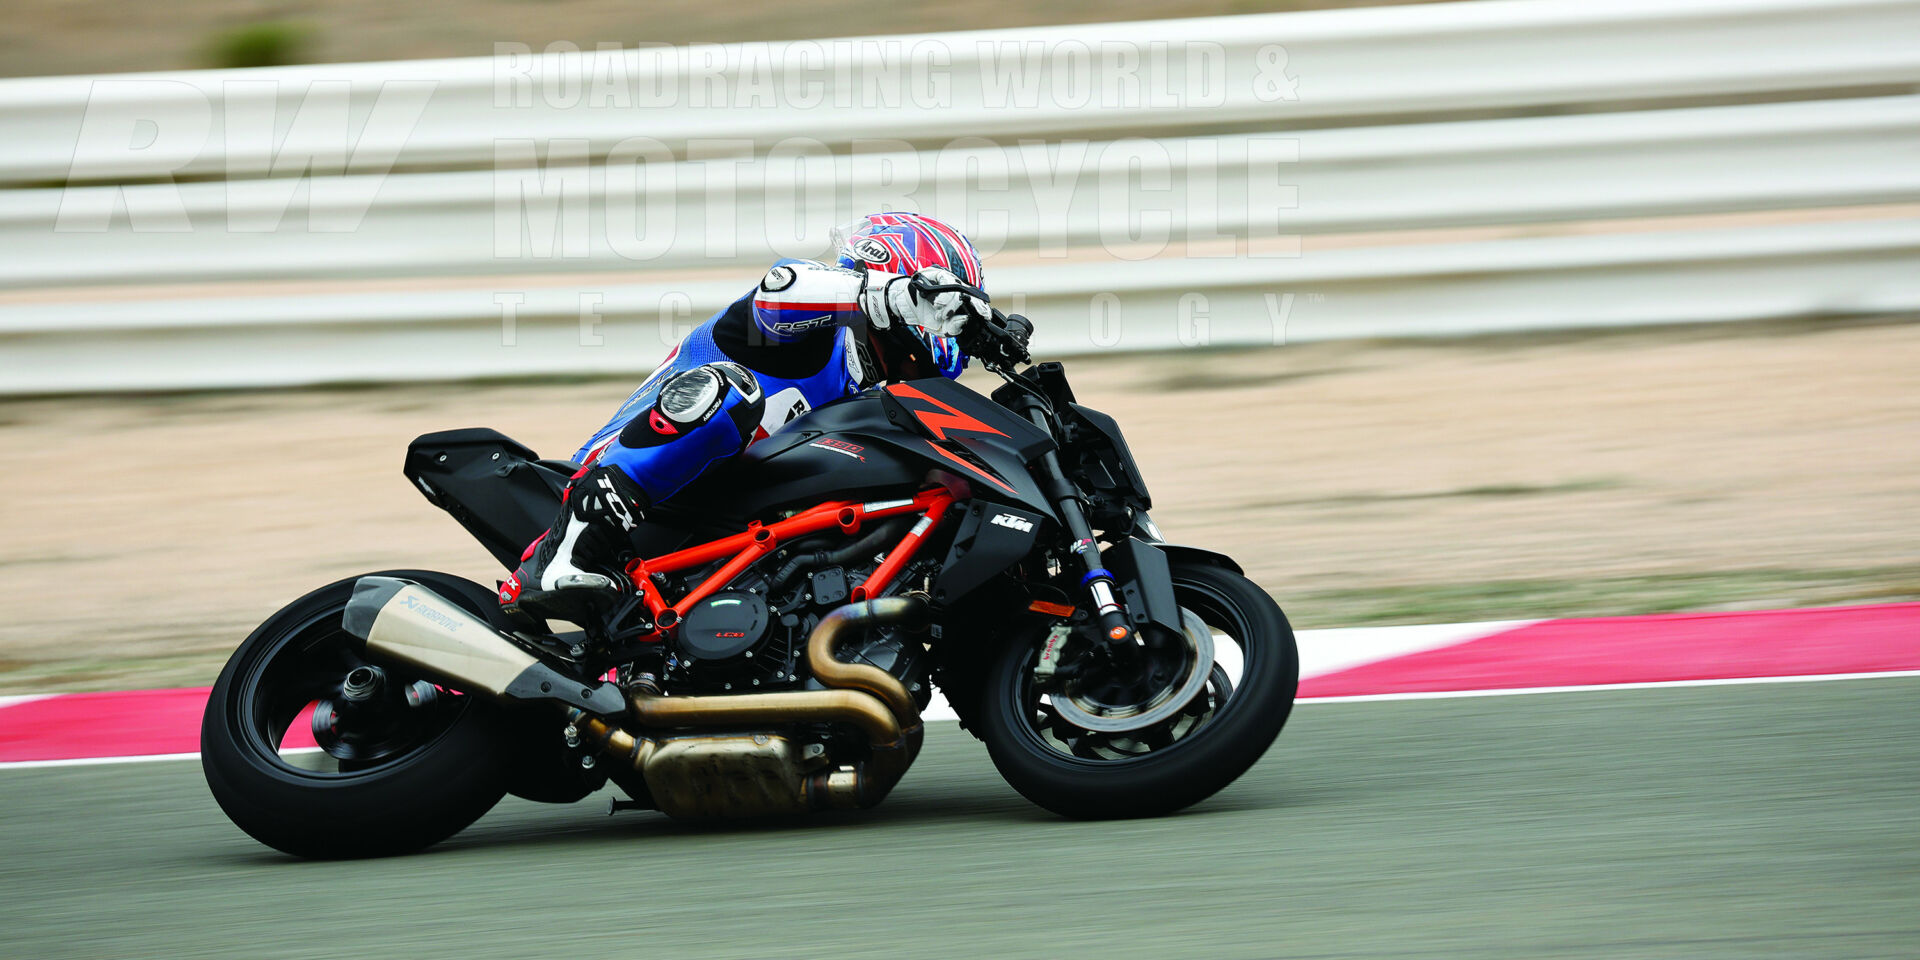 Racing Editor Chris Ulrich during one of his 10 dry laps on the racetrack aboard the 1390 SUPER DUKE R EVO. It started raining before he could try the MotoGP-style lowering system for fast starts.